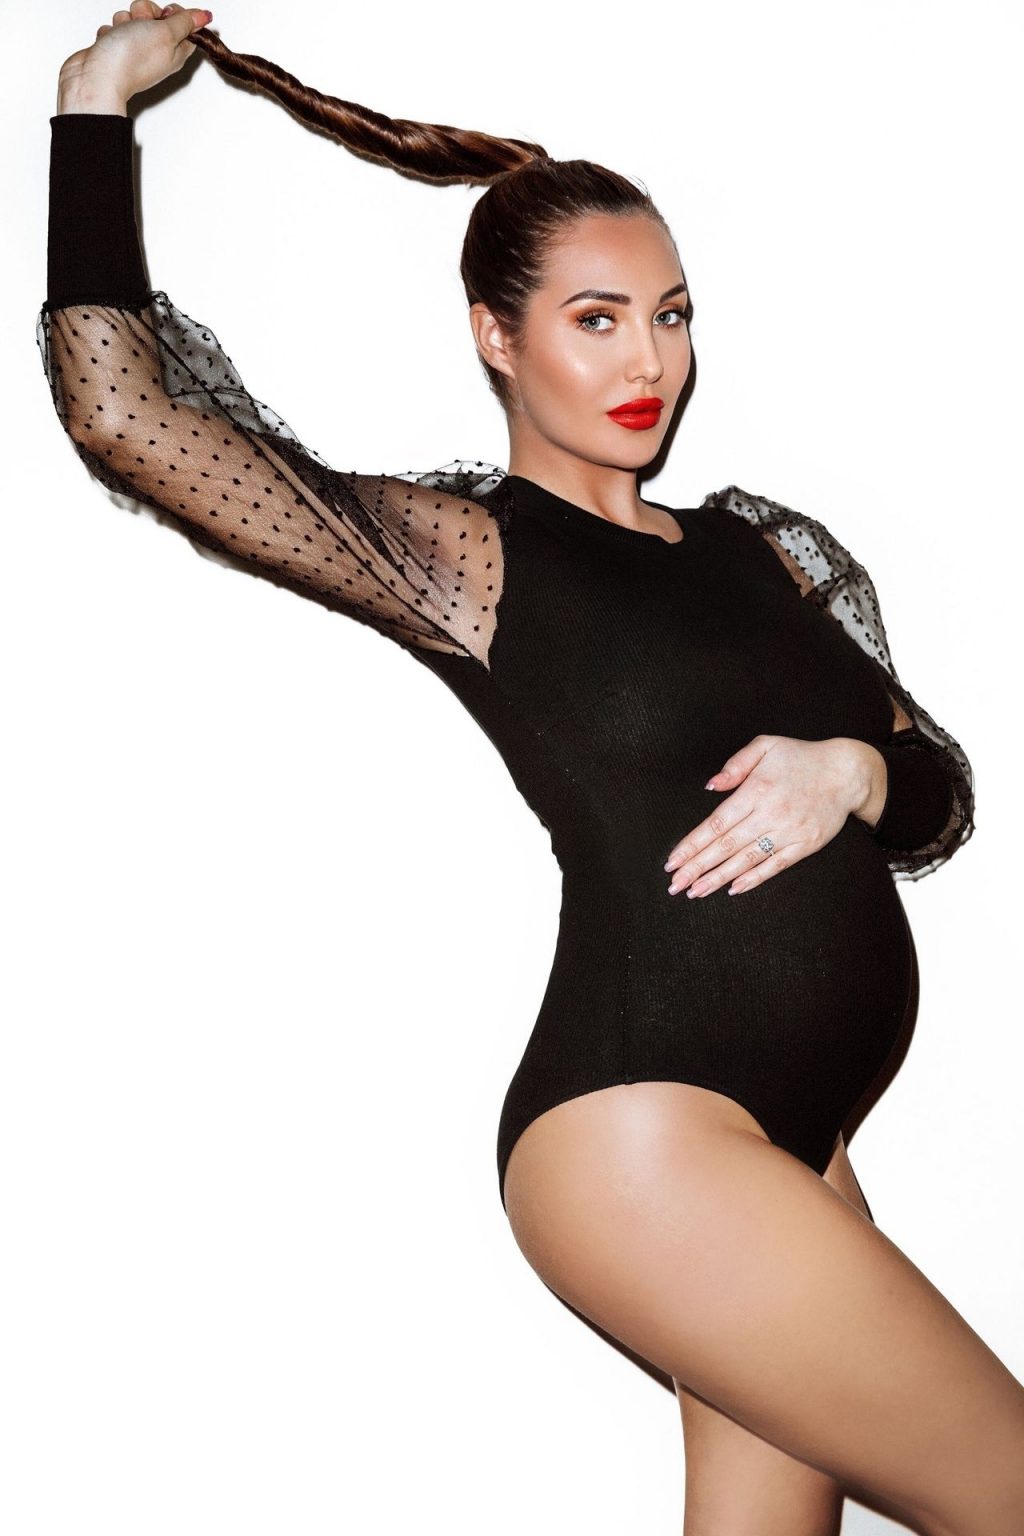 Chloe Goodman Shows Off Her Bare Bump in a Photoshoot (5 Photos)